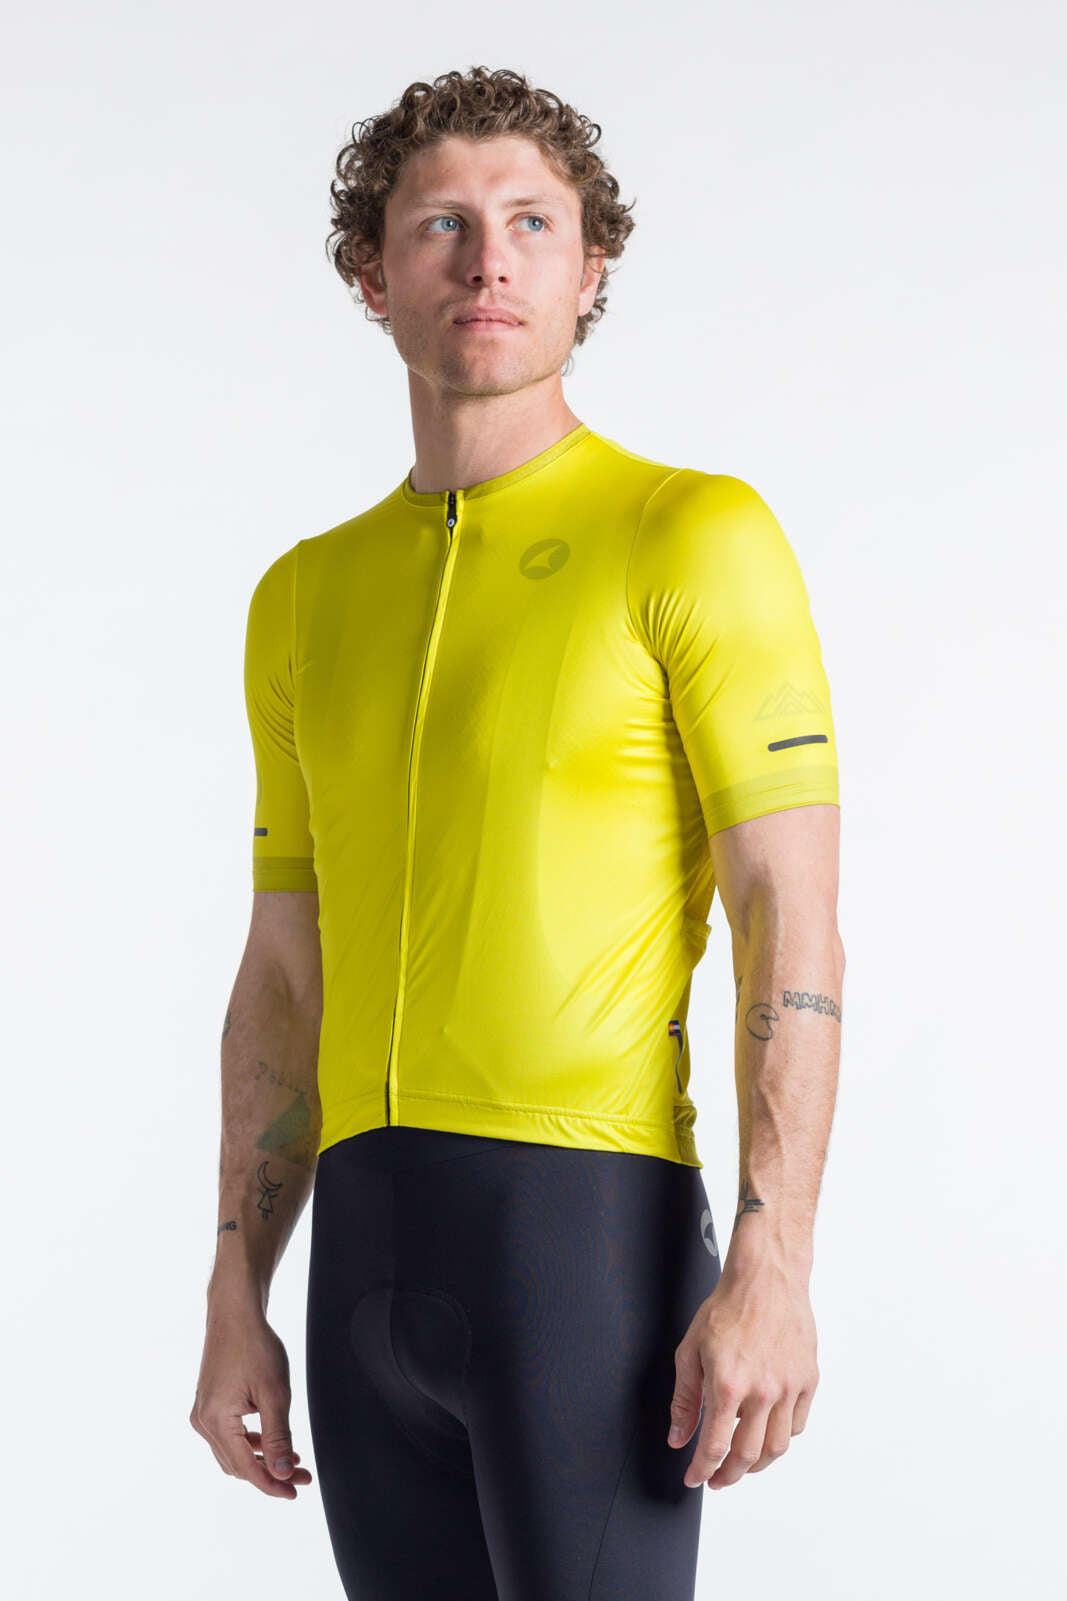 Men's Best Yellow Cycling Jersey - Summit Front View